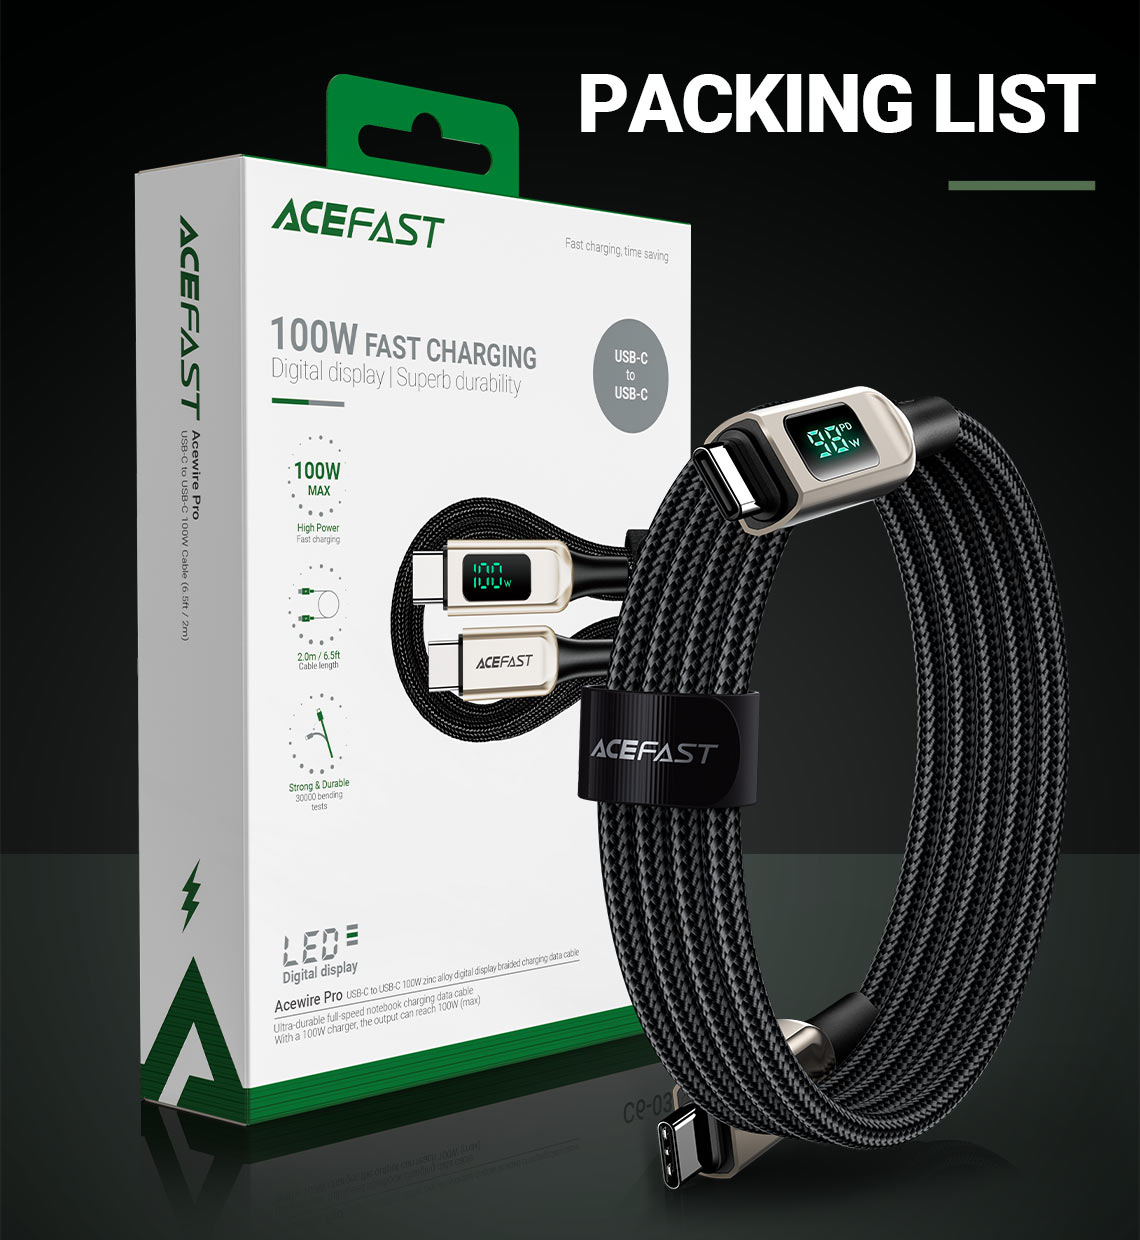 acefast-c6-03-usbc-to-usbc-charging-data-cable-packing-list